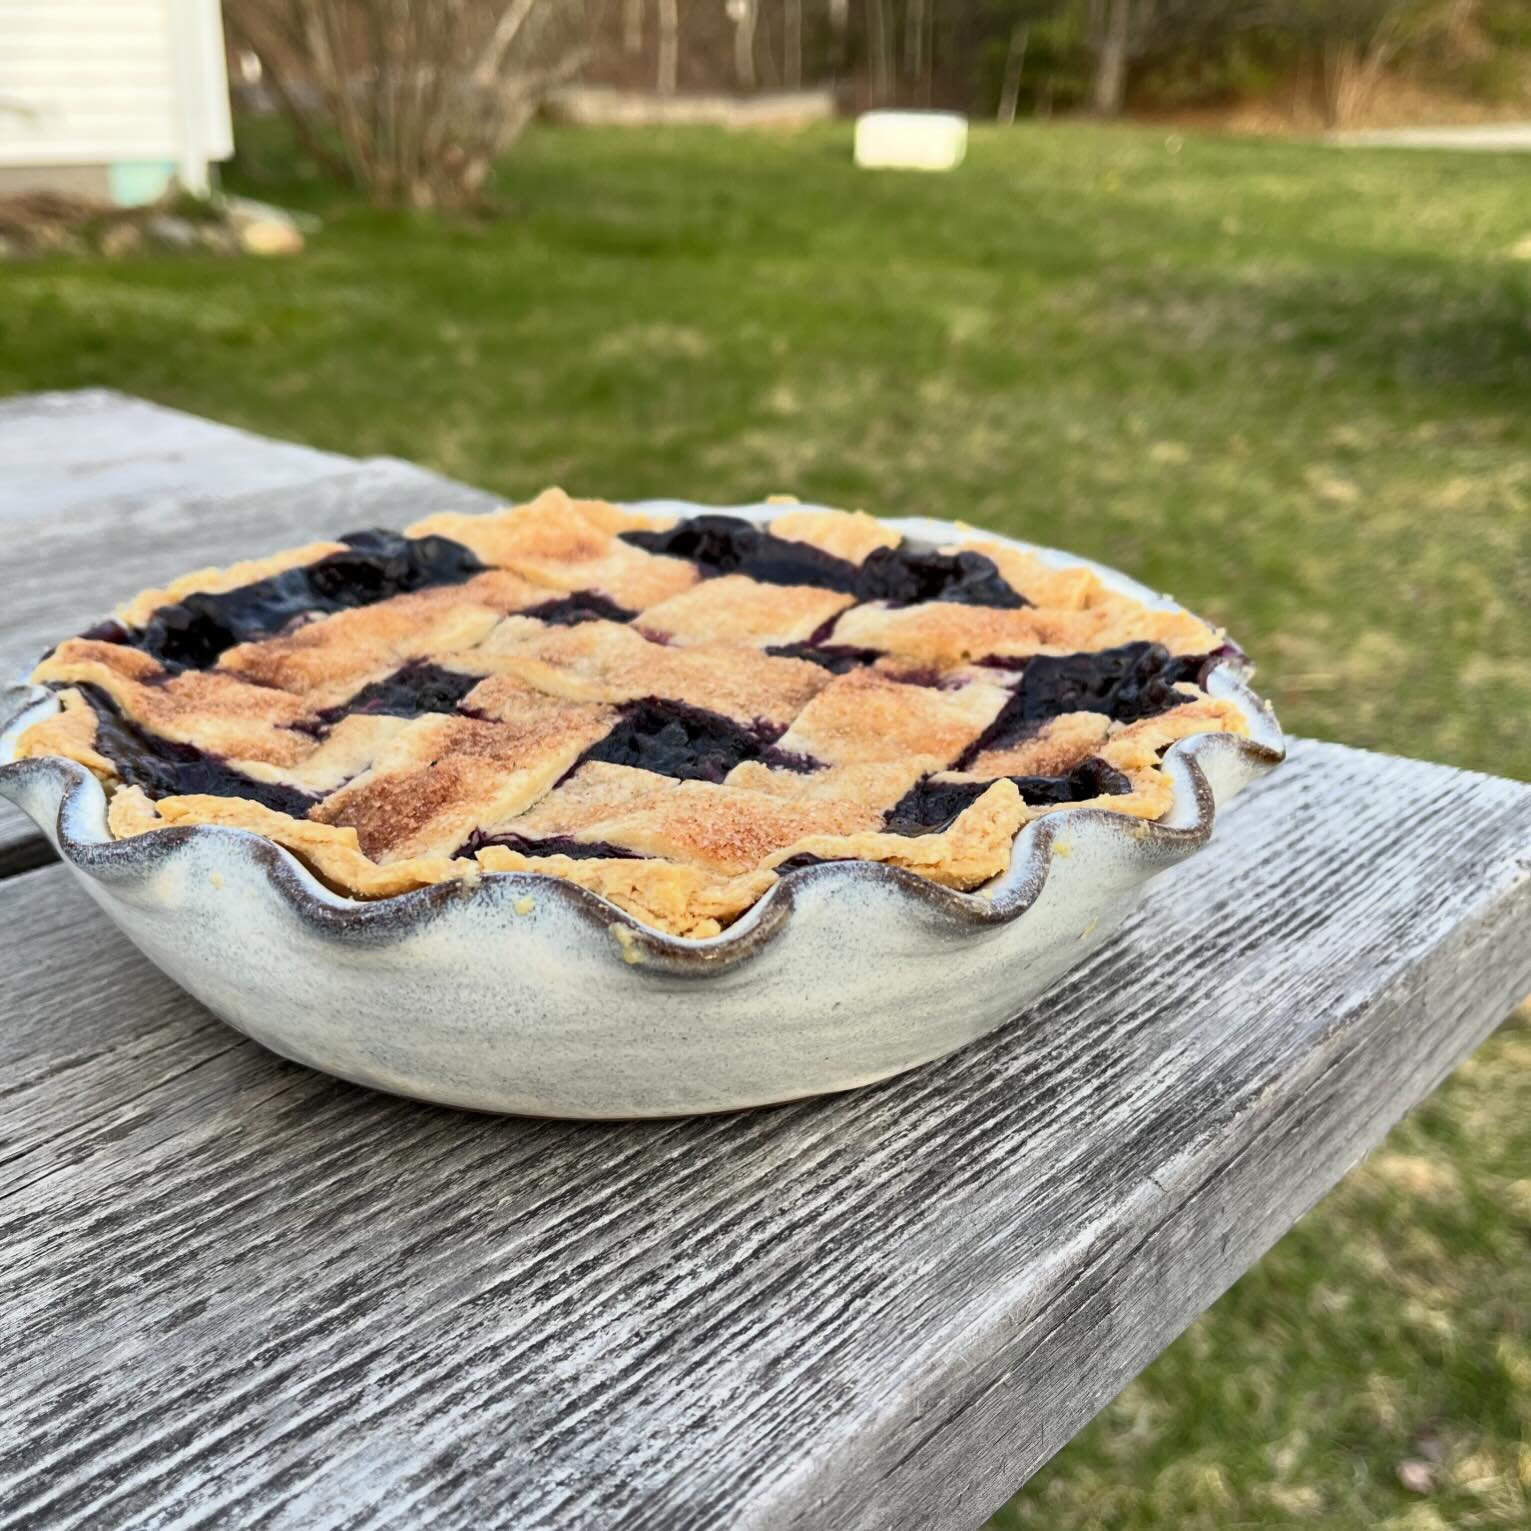 If you, like me, love to eat pie - let me assure you it tastes better if you bake it in a dish you&rsquo;re also really excited about. I&rsquo;ll have a couple like this at this Saturday&rsquo;s spring craft fair at Hazen Union School in Hardwick, fr